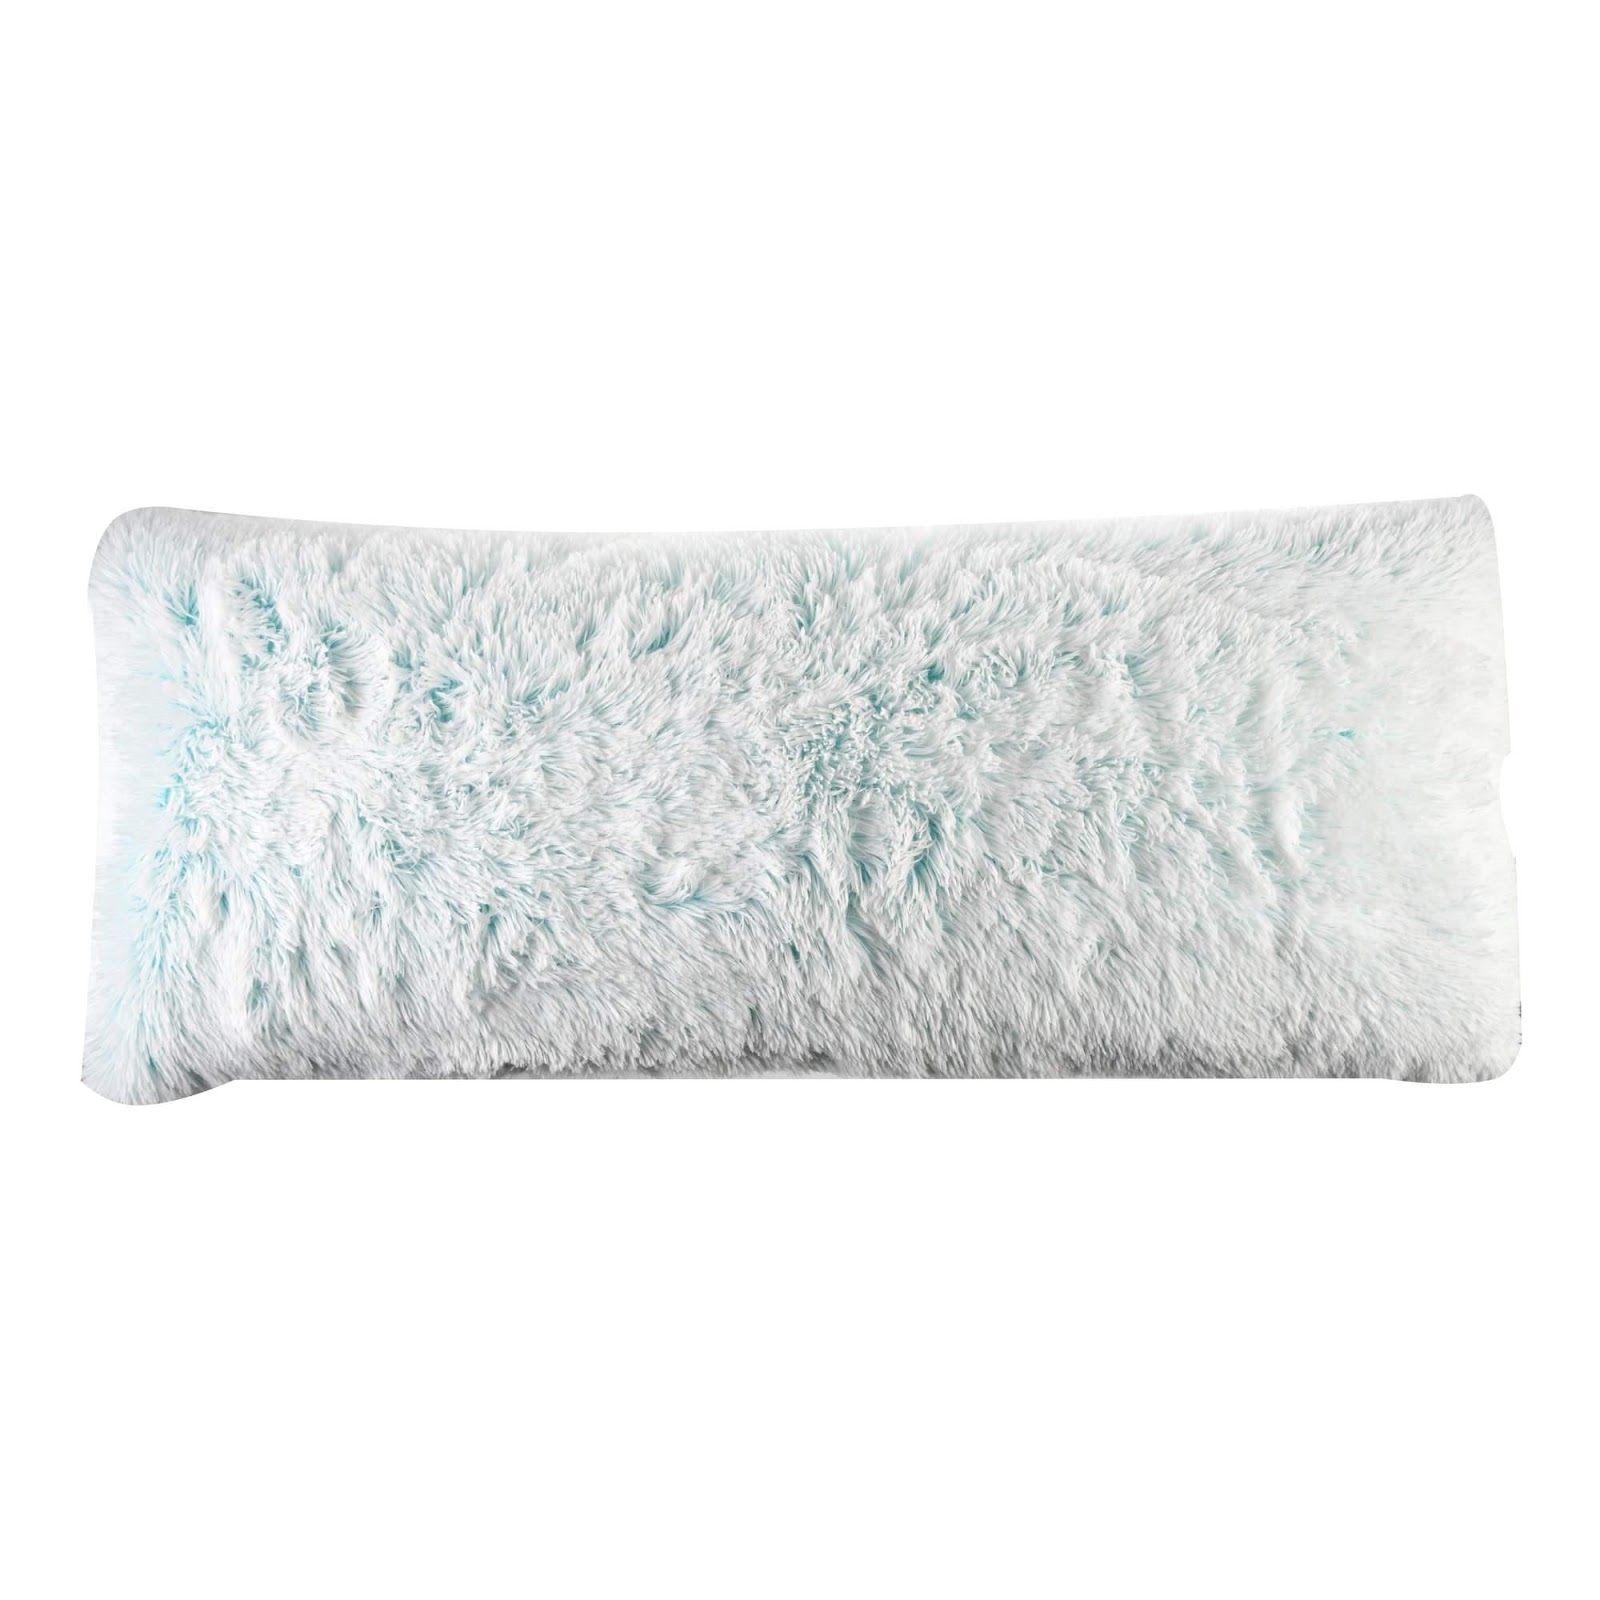 Fluffy body pillows typically need to be hand cleaned or spot cleaned